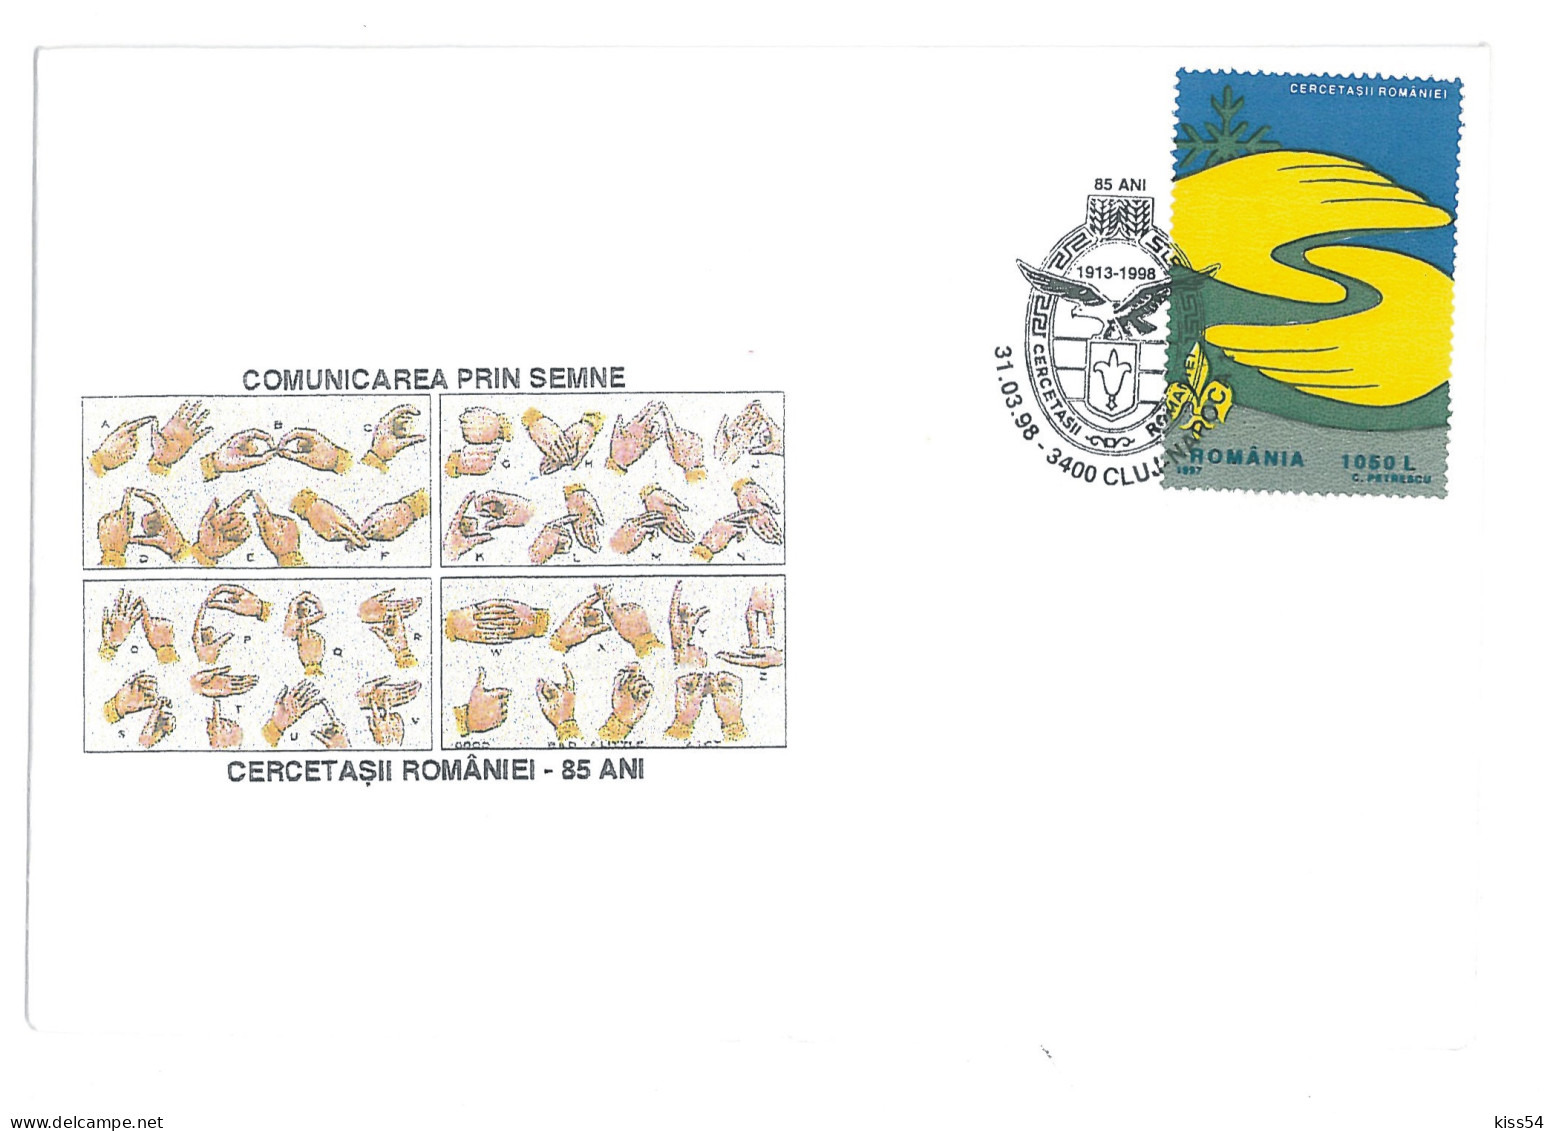 SC 59 - 1213 Scout ROMANIA, Special Stamp - Cover - Used - 1998 - Covers & Documents